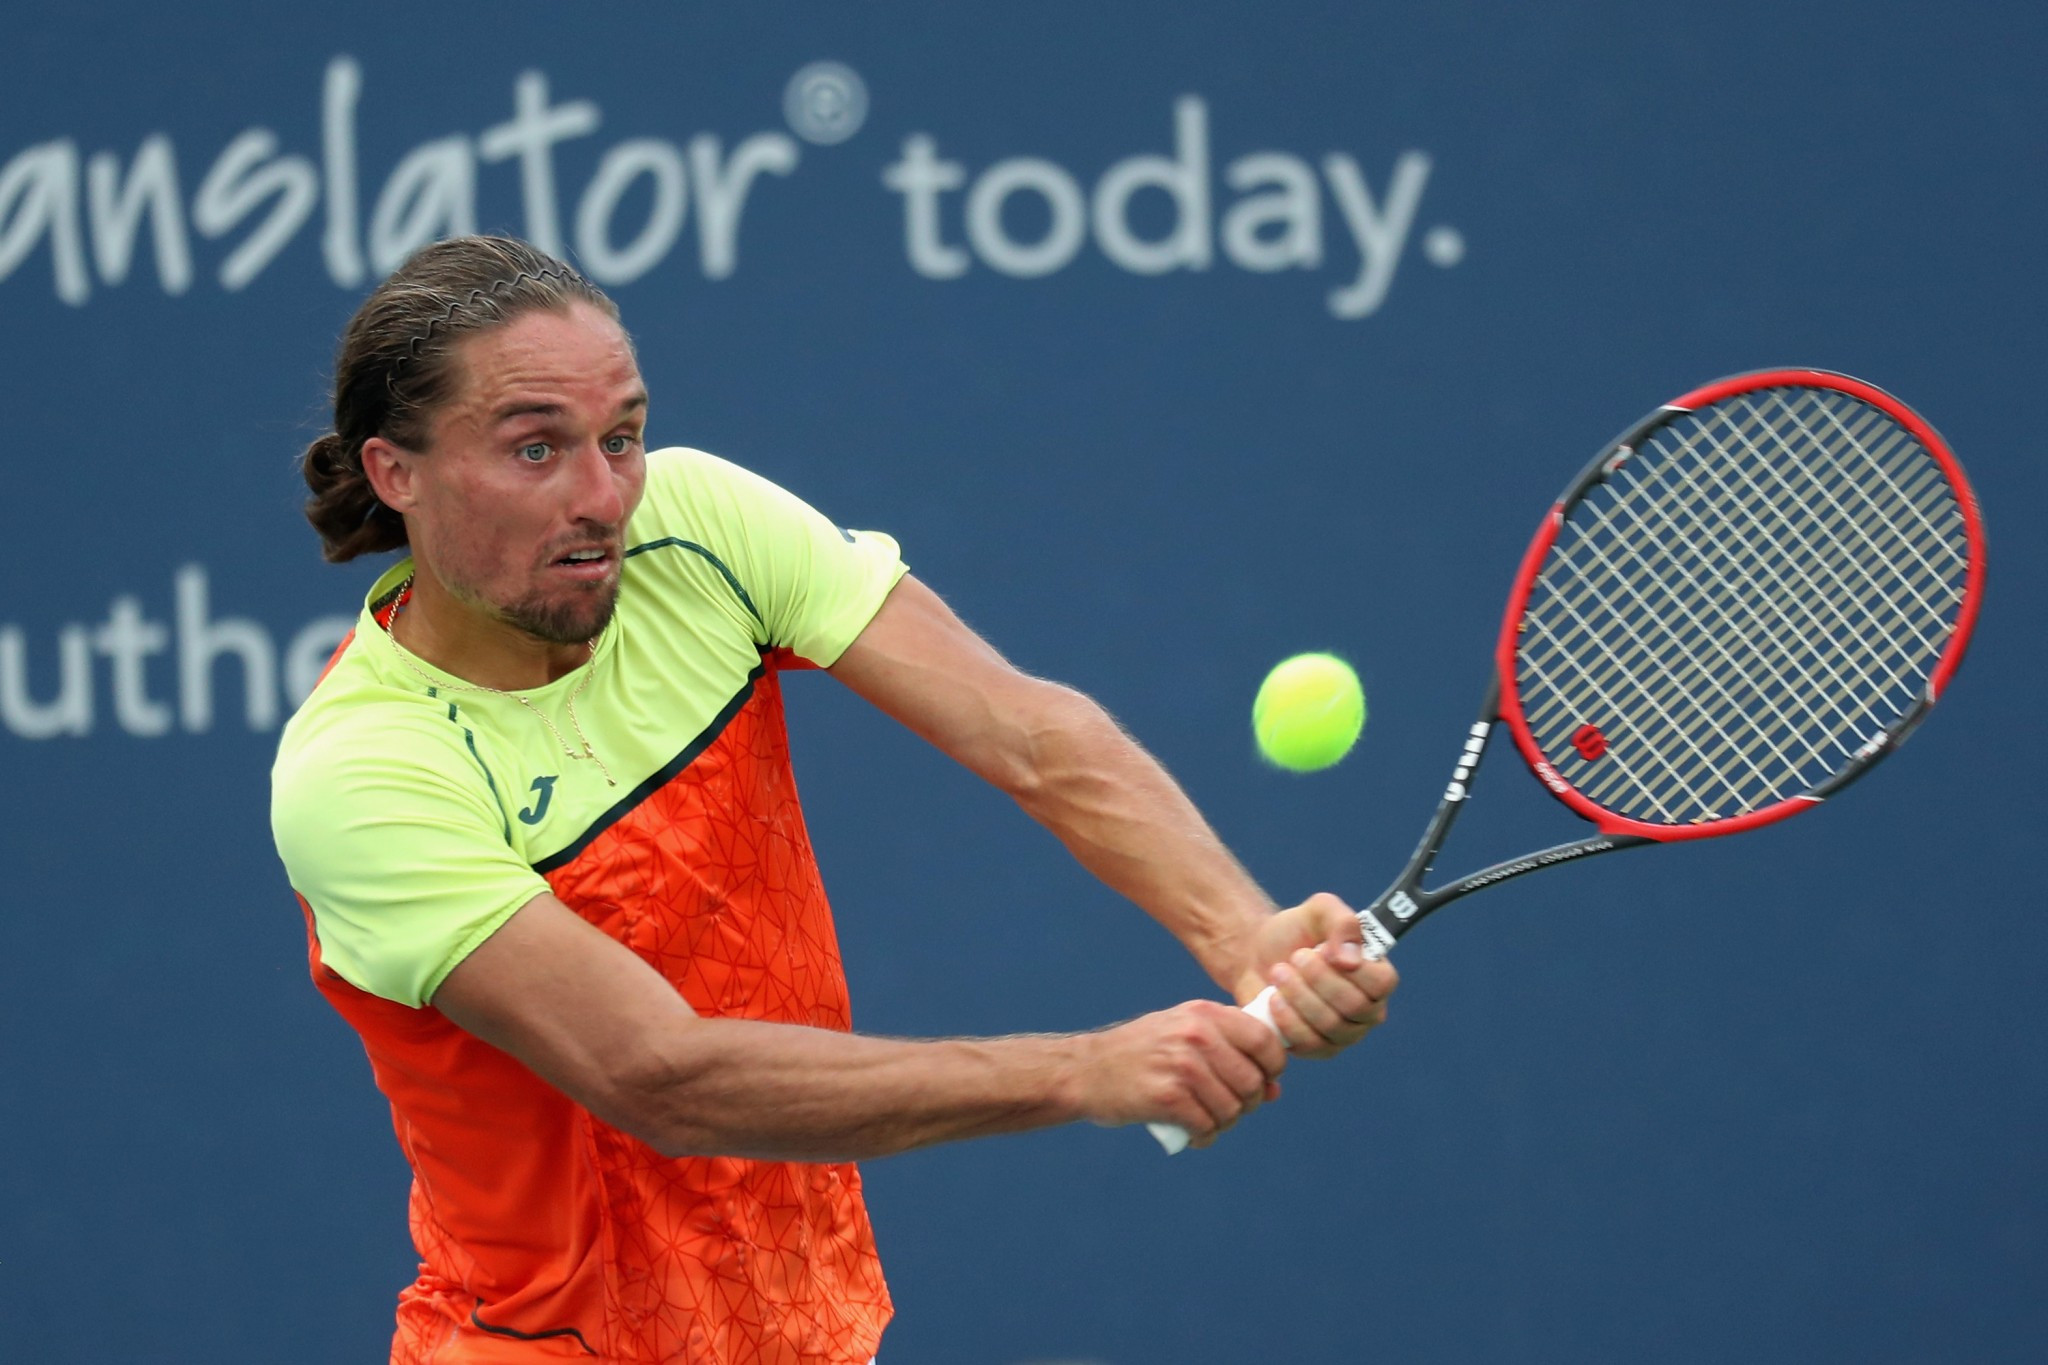 Alexandr Dologopolov, pictured, and Sergiy Stakhovsky are preparing to return to war after a break with family ©Getty Images